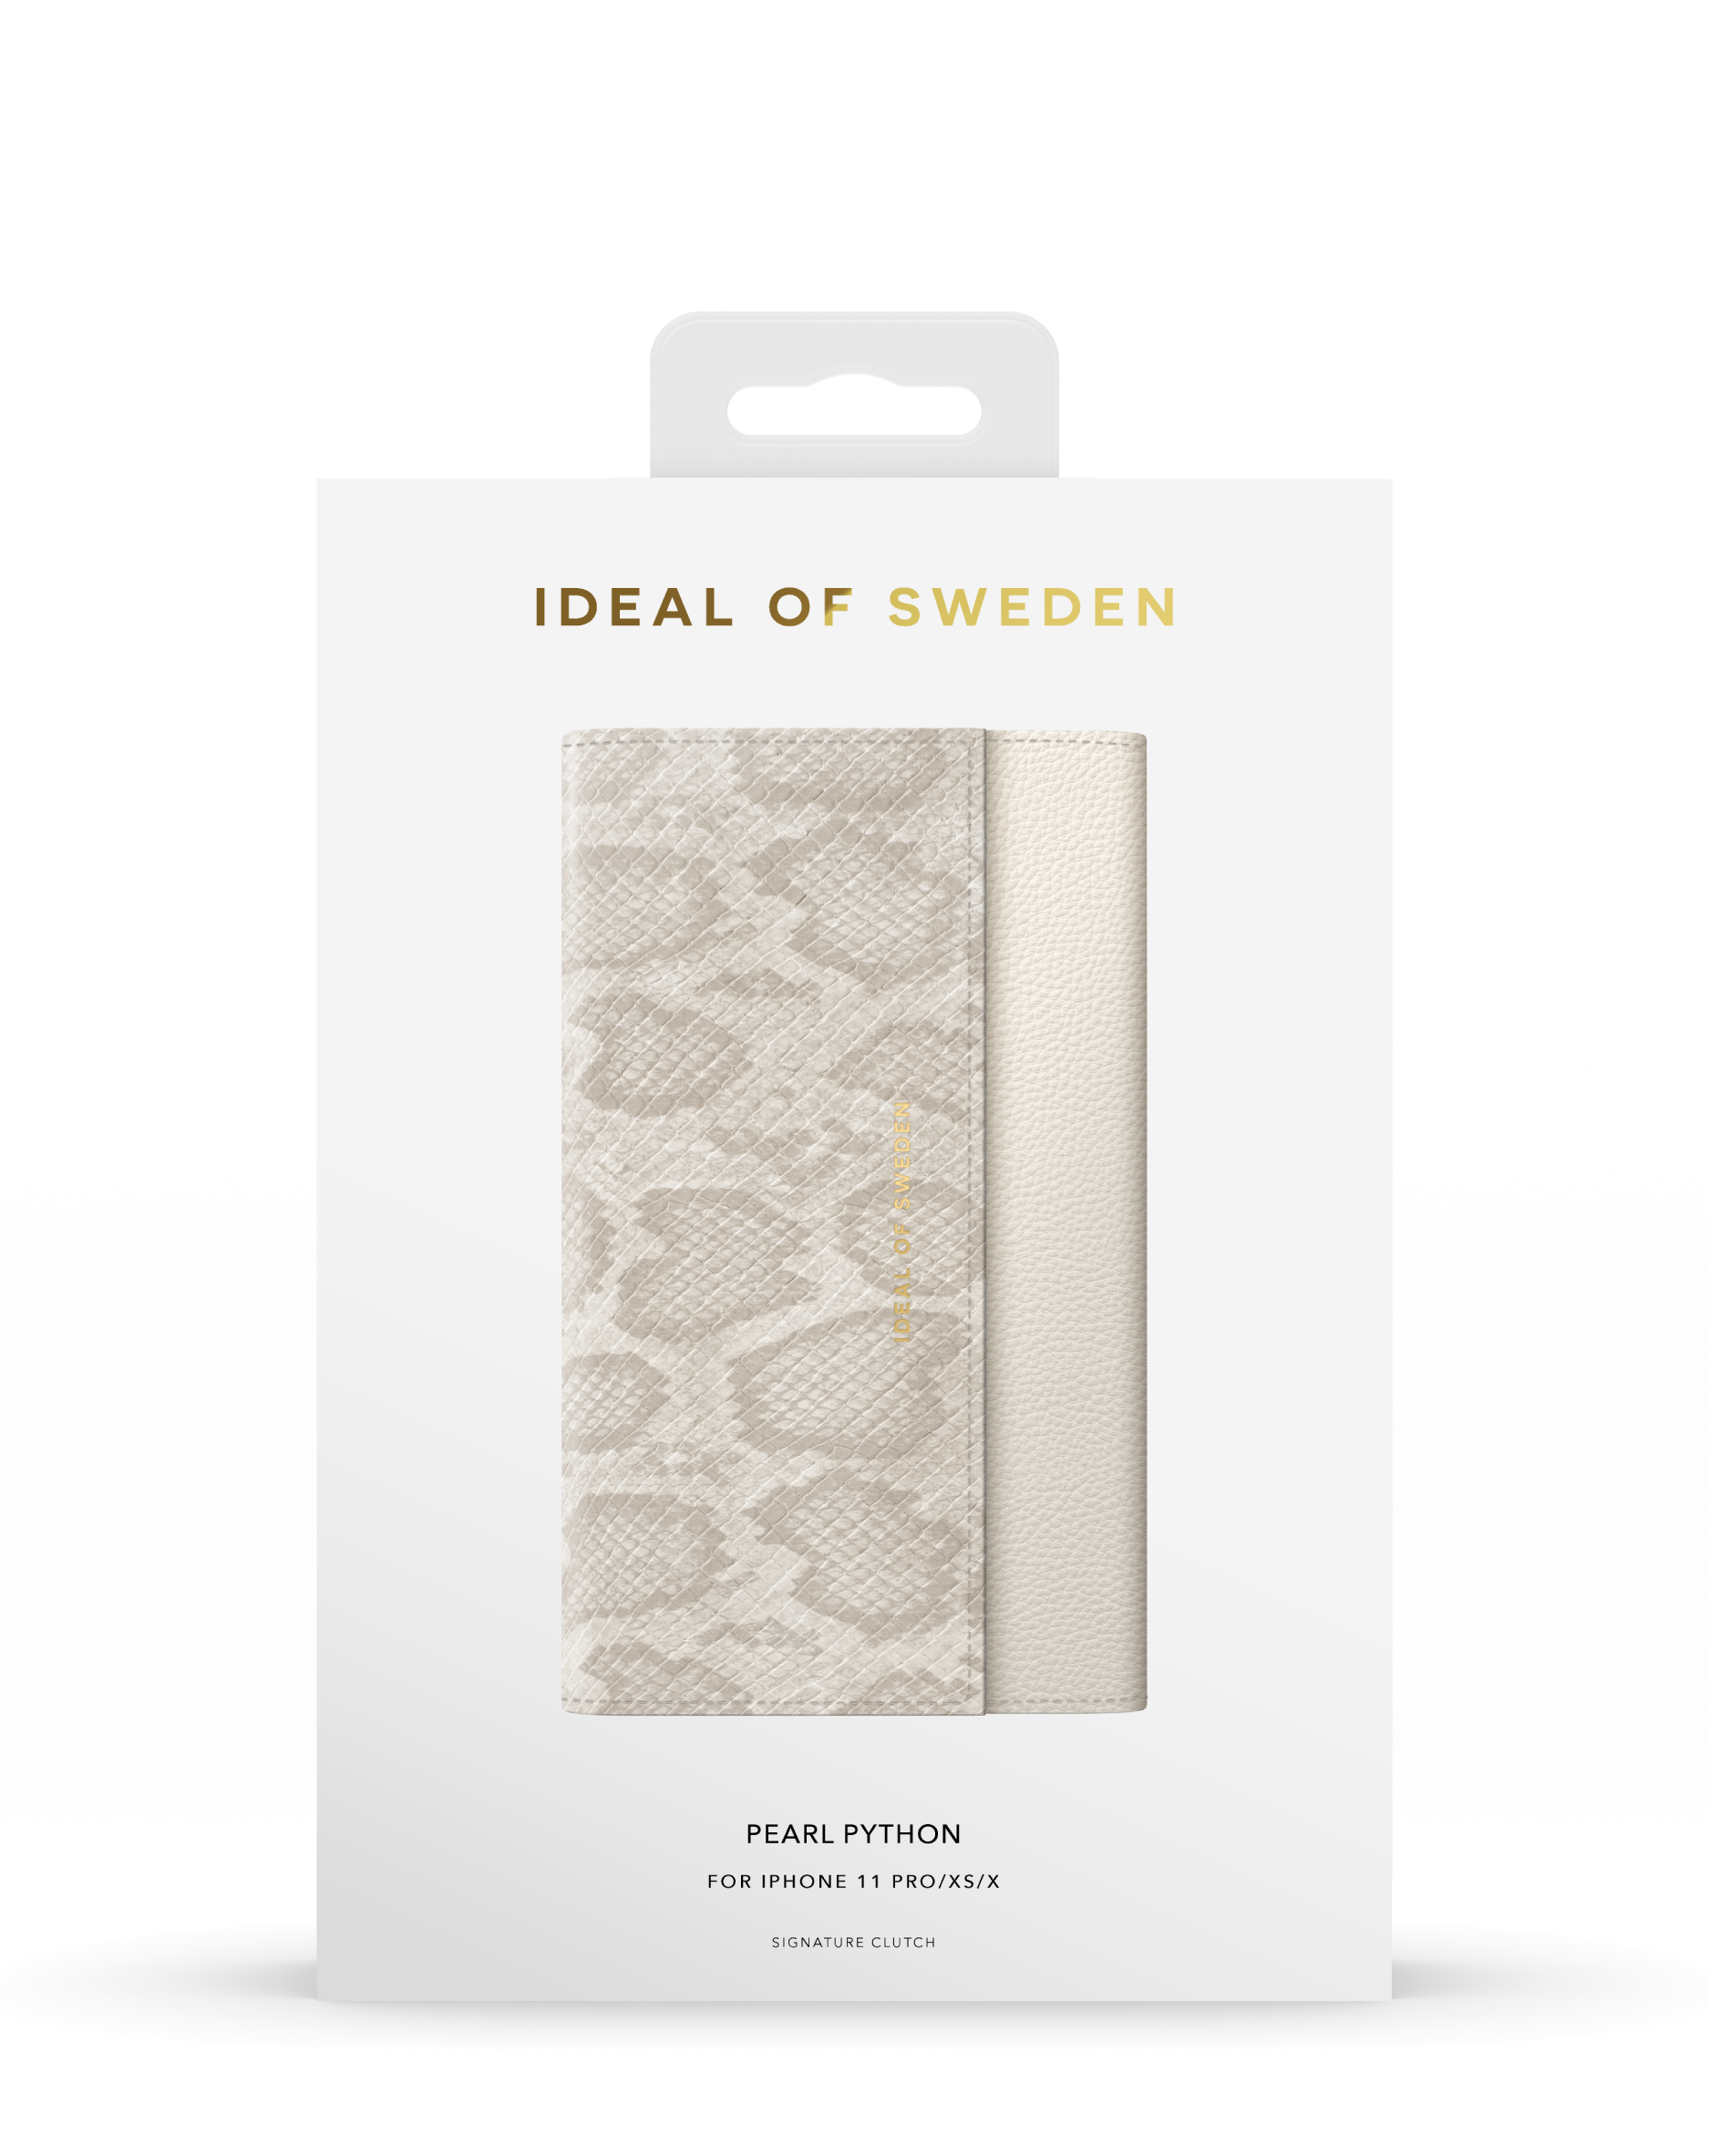 IDEAL OF SWEDEN IDSCSS20-I1958-200, iPhone 11 Cover, Apple, Pearl Python iPhone X, XS, Full Pro, iPhone